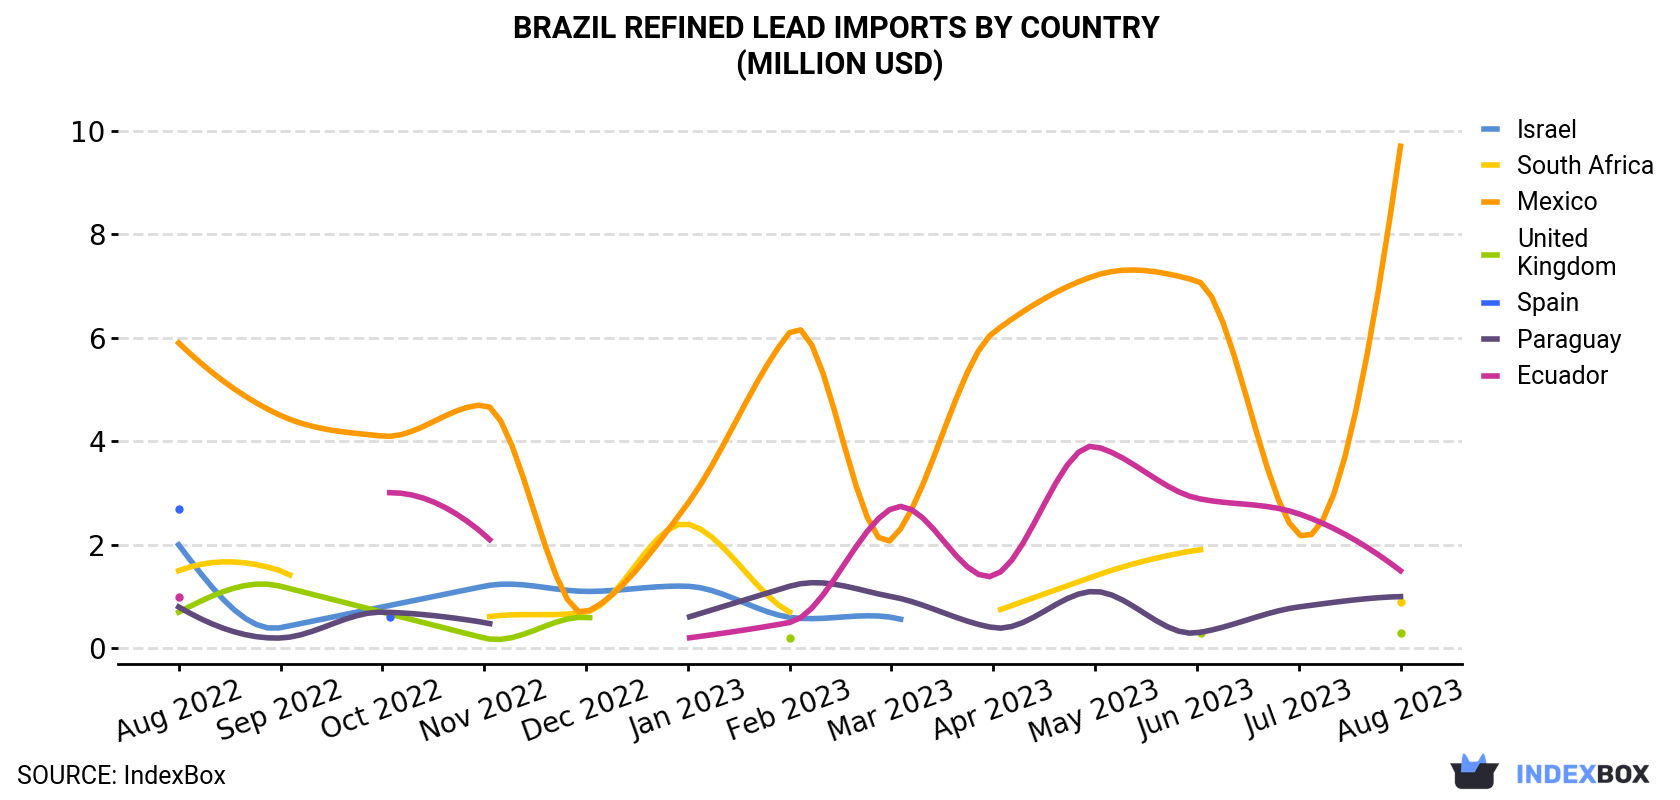 Brazil Refined Lead Imports By Country (Million USD)